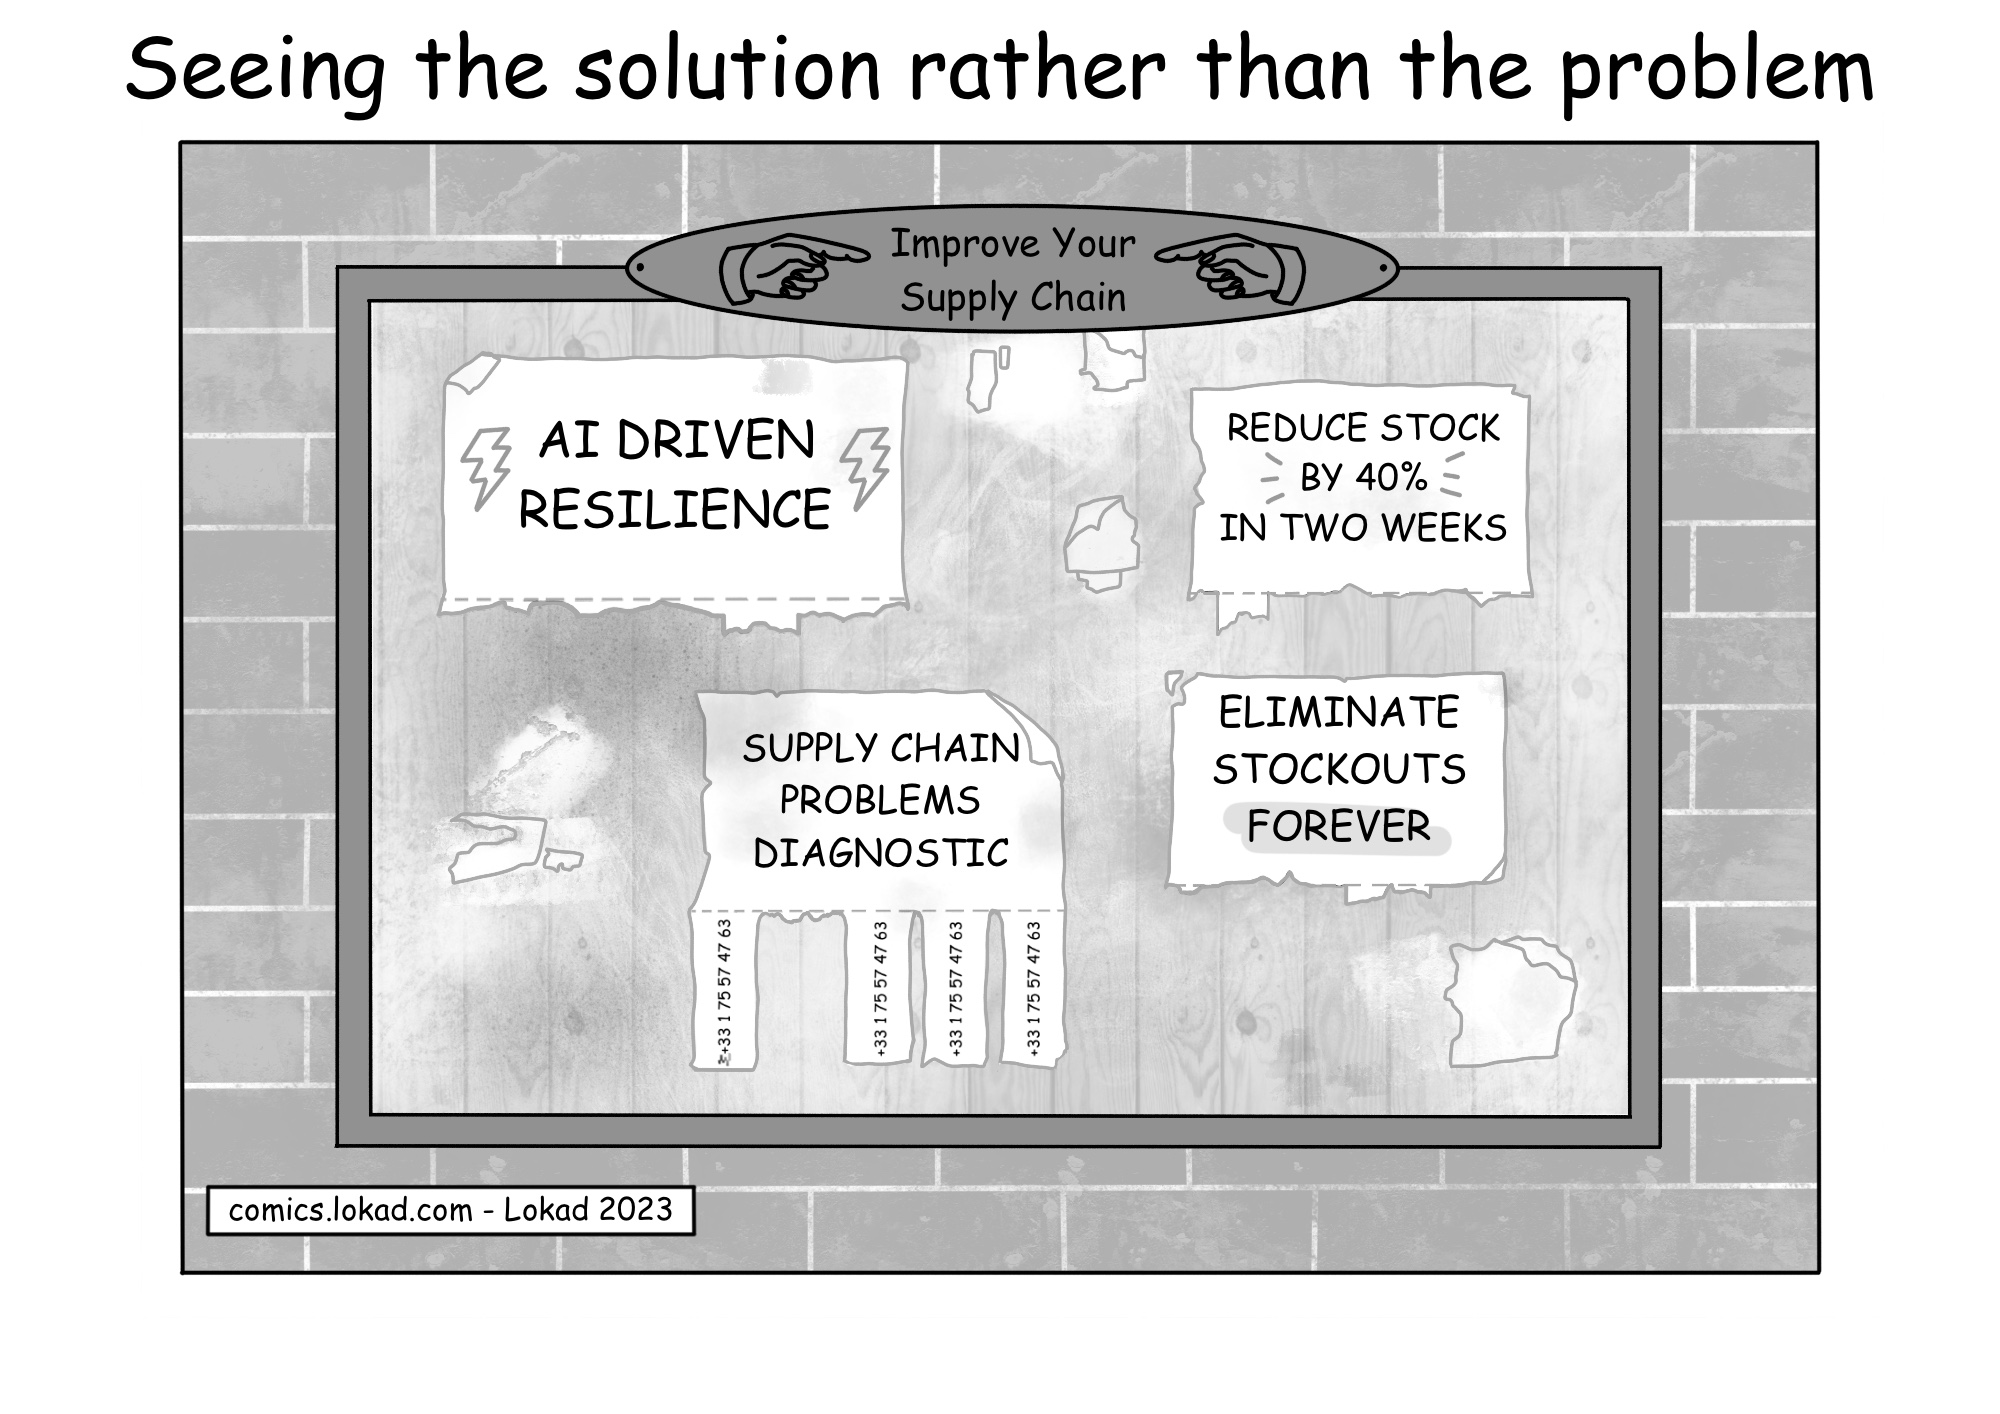 Seeing the solution rather than the problem